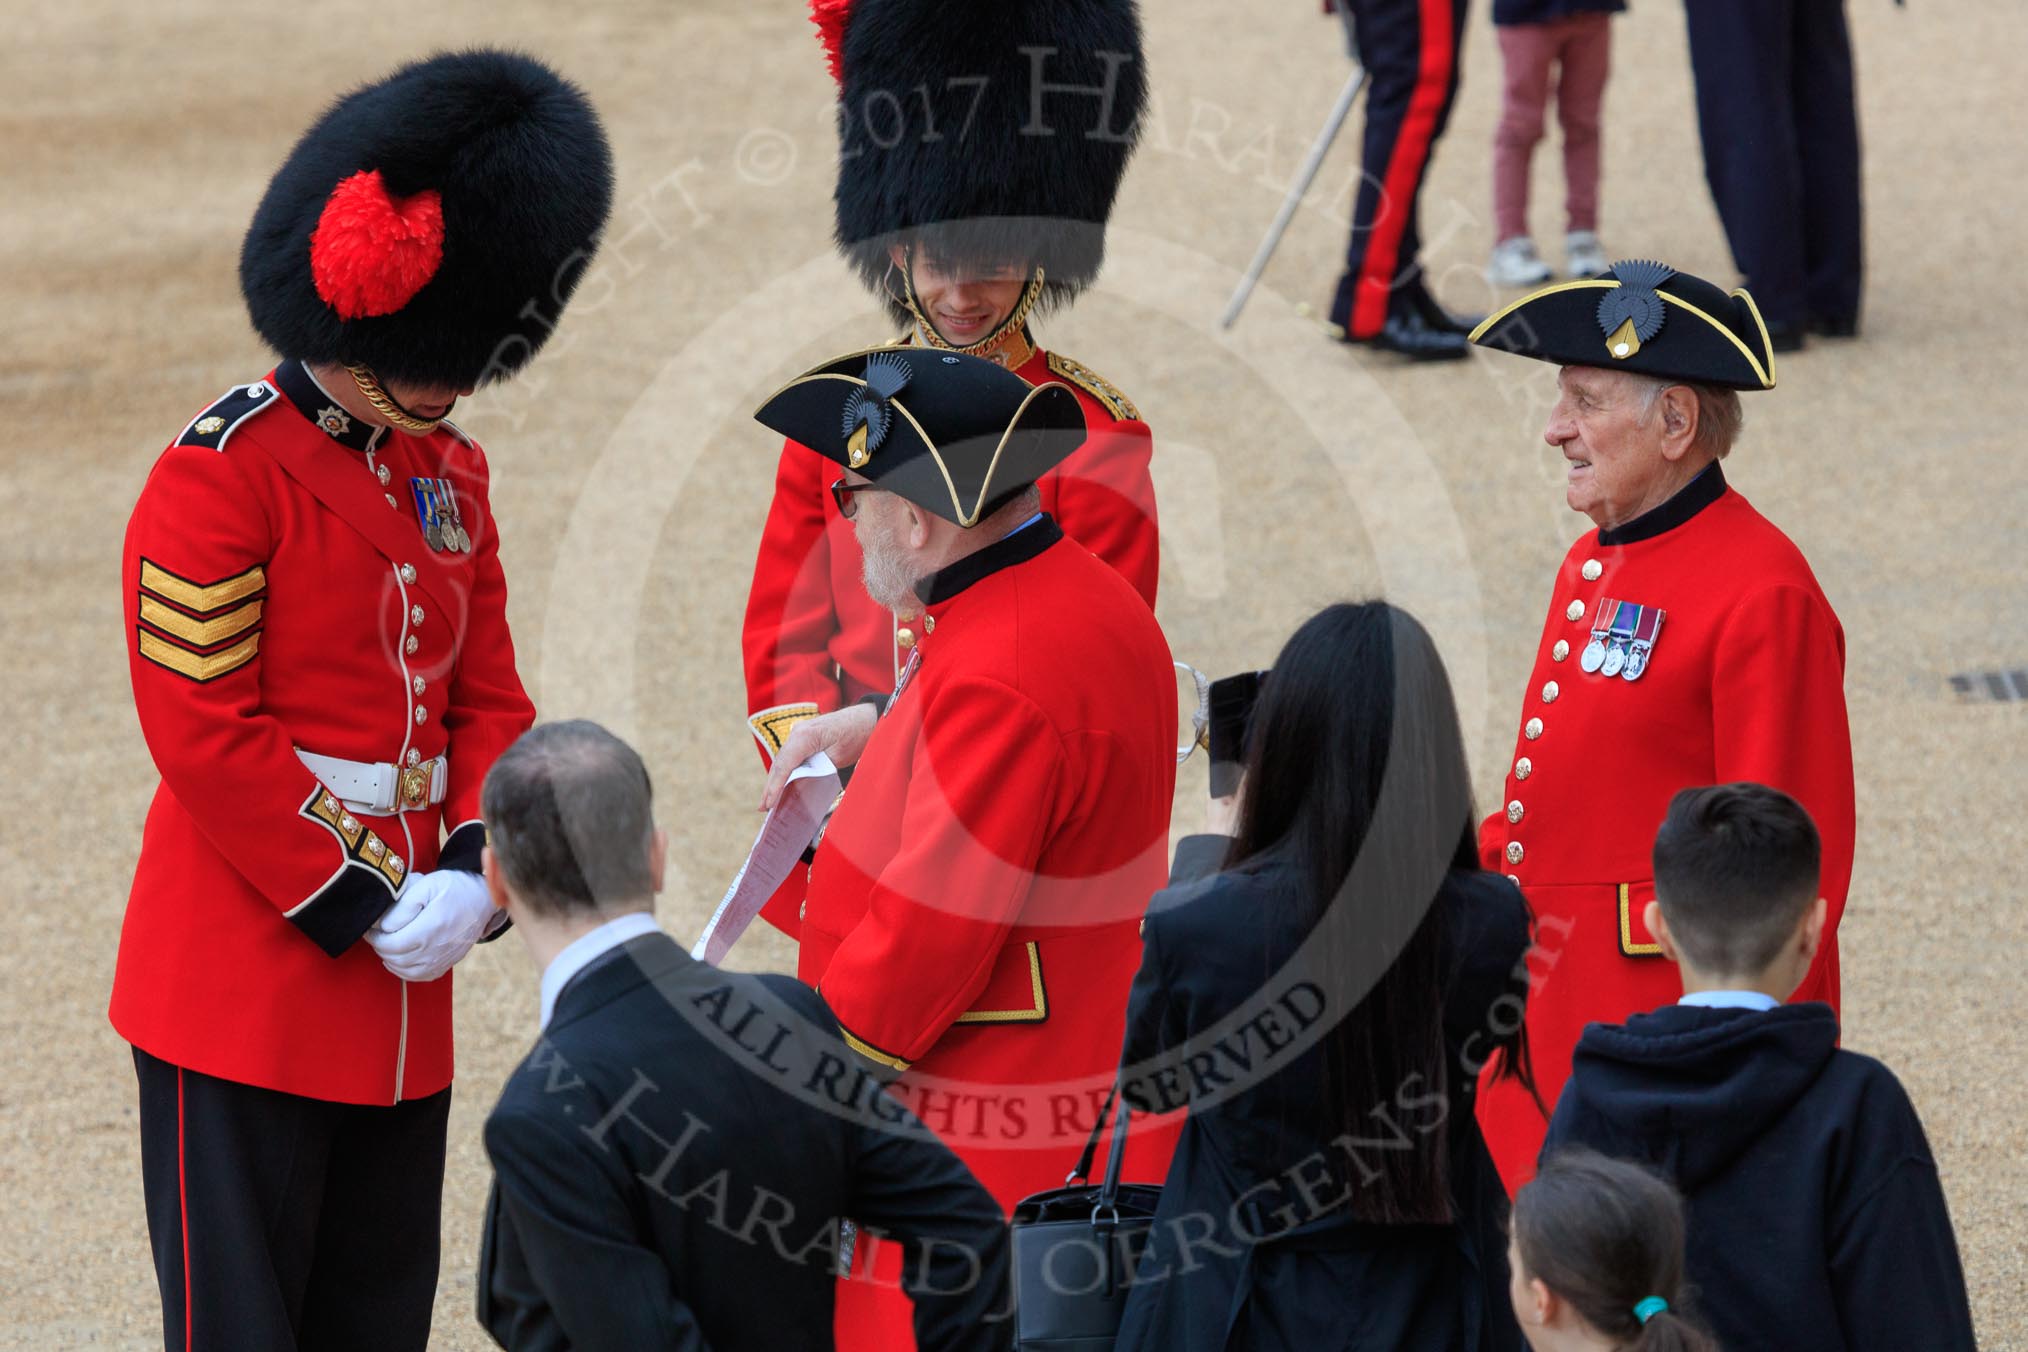 A Coldstream Guards Sergeant and Captain welcoming Chelsea Pensioners before The Colonel's Review 2018 (final rehearsal for Trooping the Colour, The Queen's Birthday Parade)  at Horse Guards Parade, Westminster, London, 2 June 2018, 09:19.